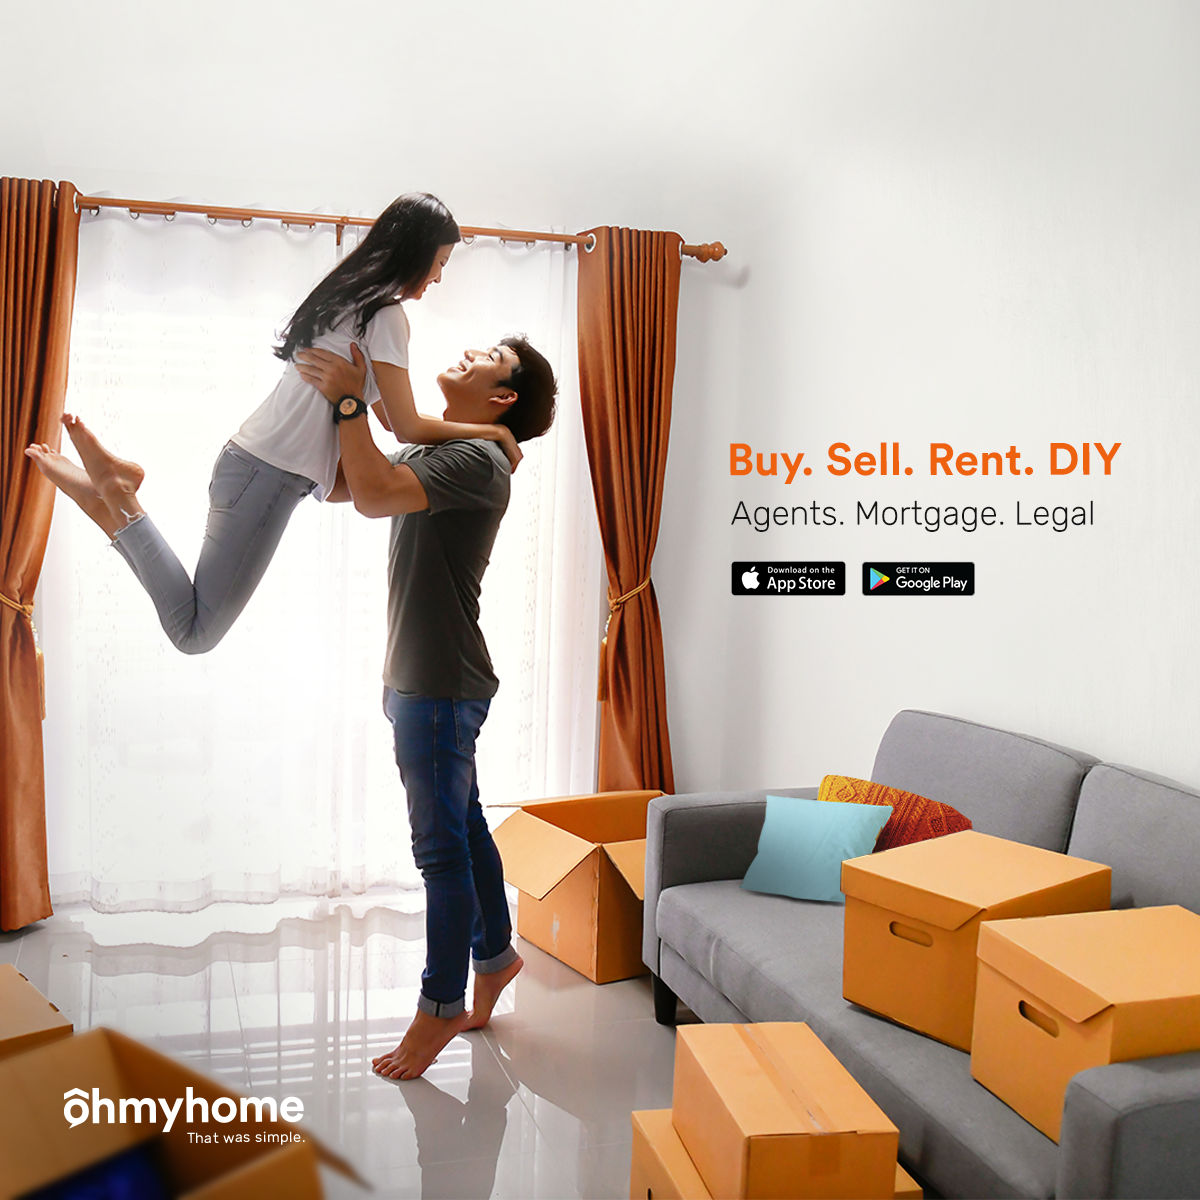 Ohmyhome App Features Condo and Landed Property